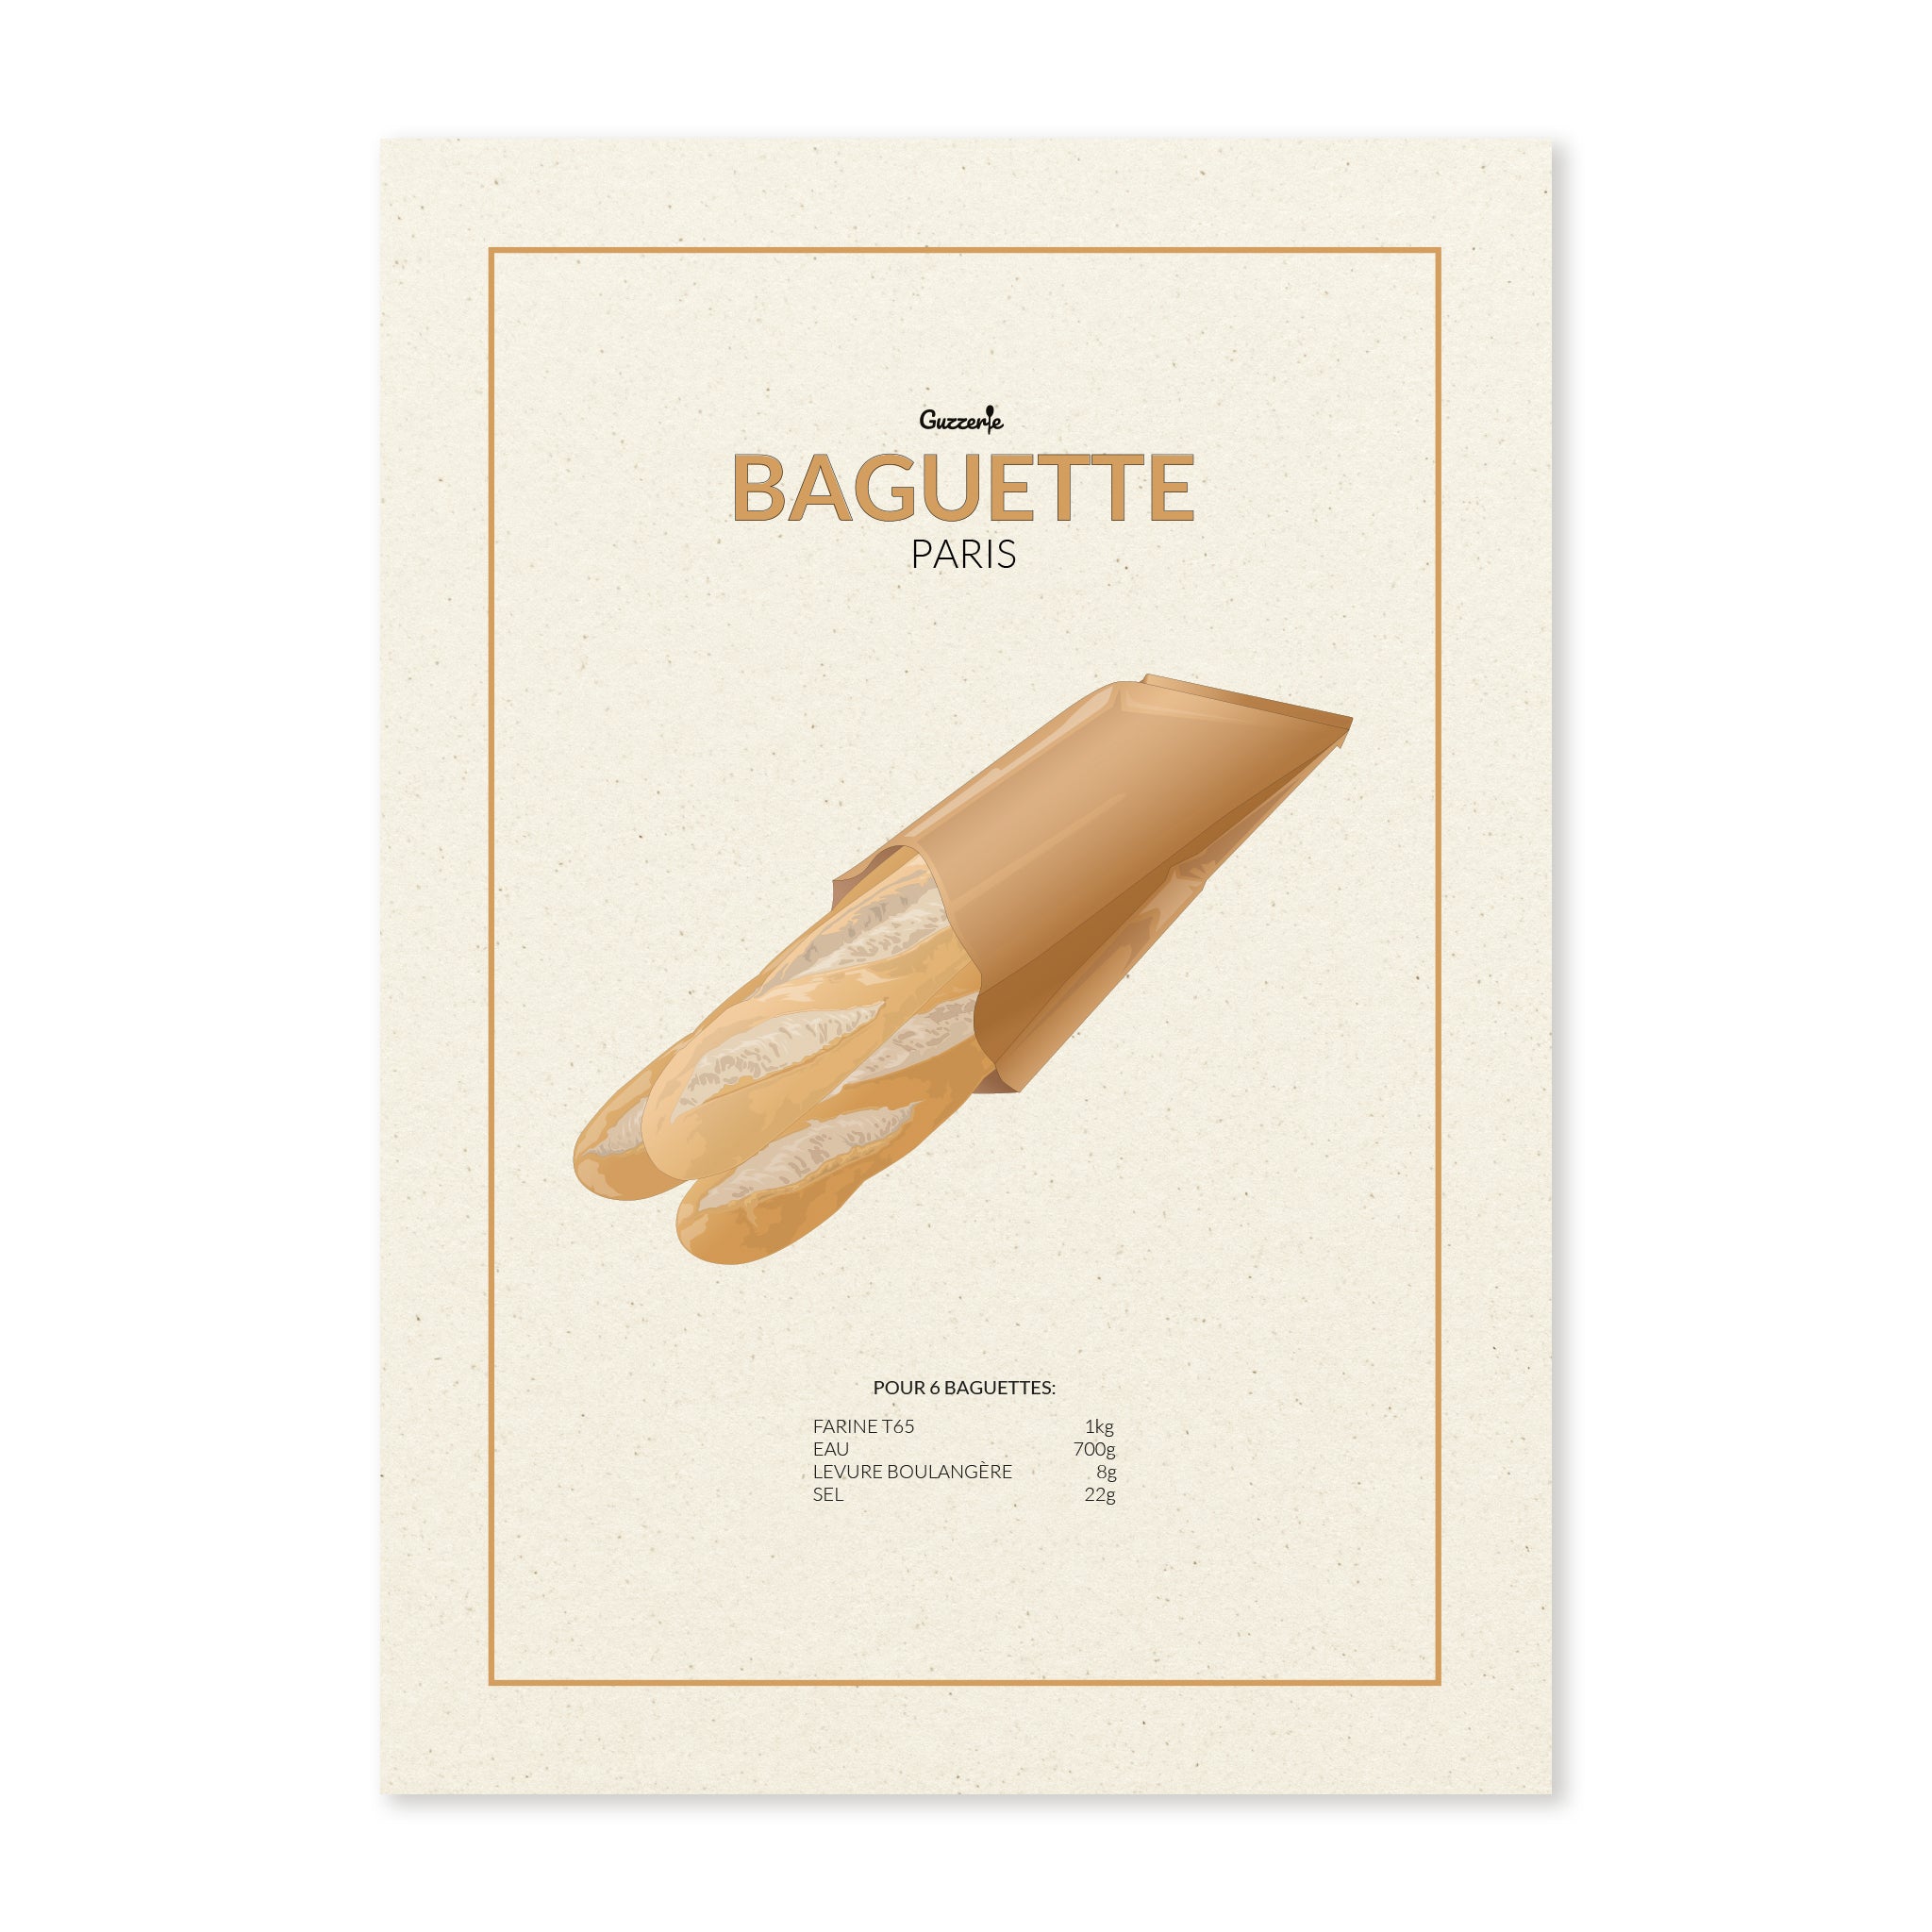 Iconic Poster of Baguette | Guzzerie